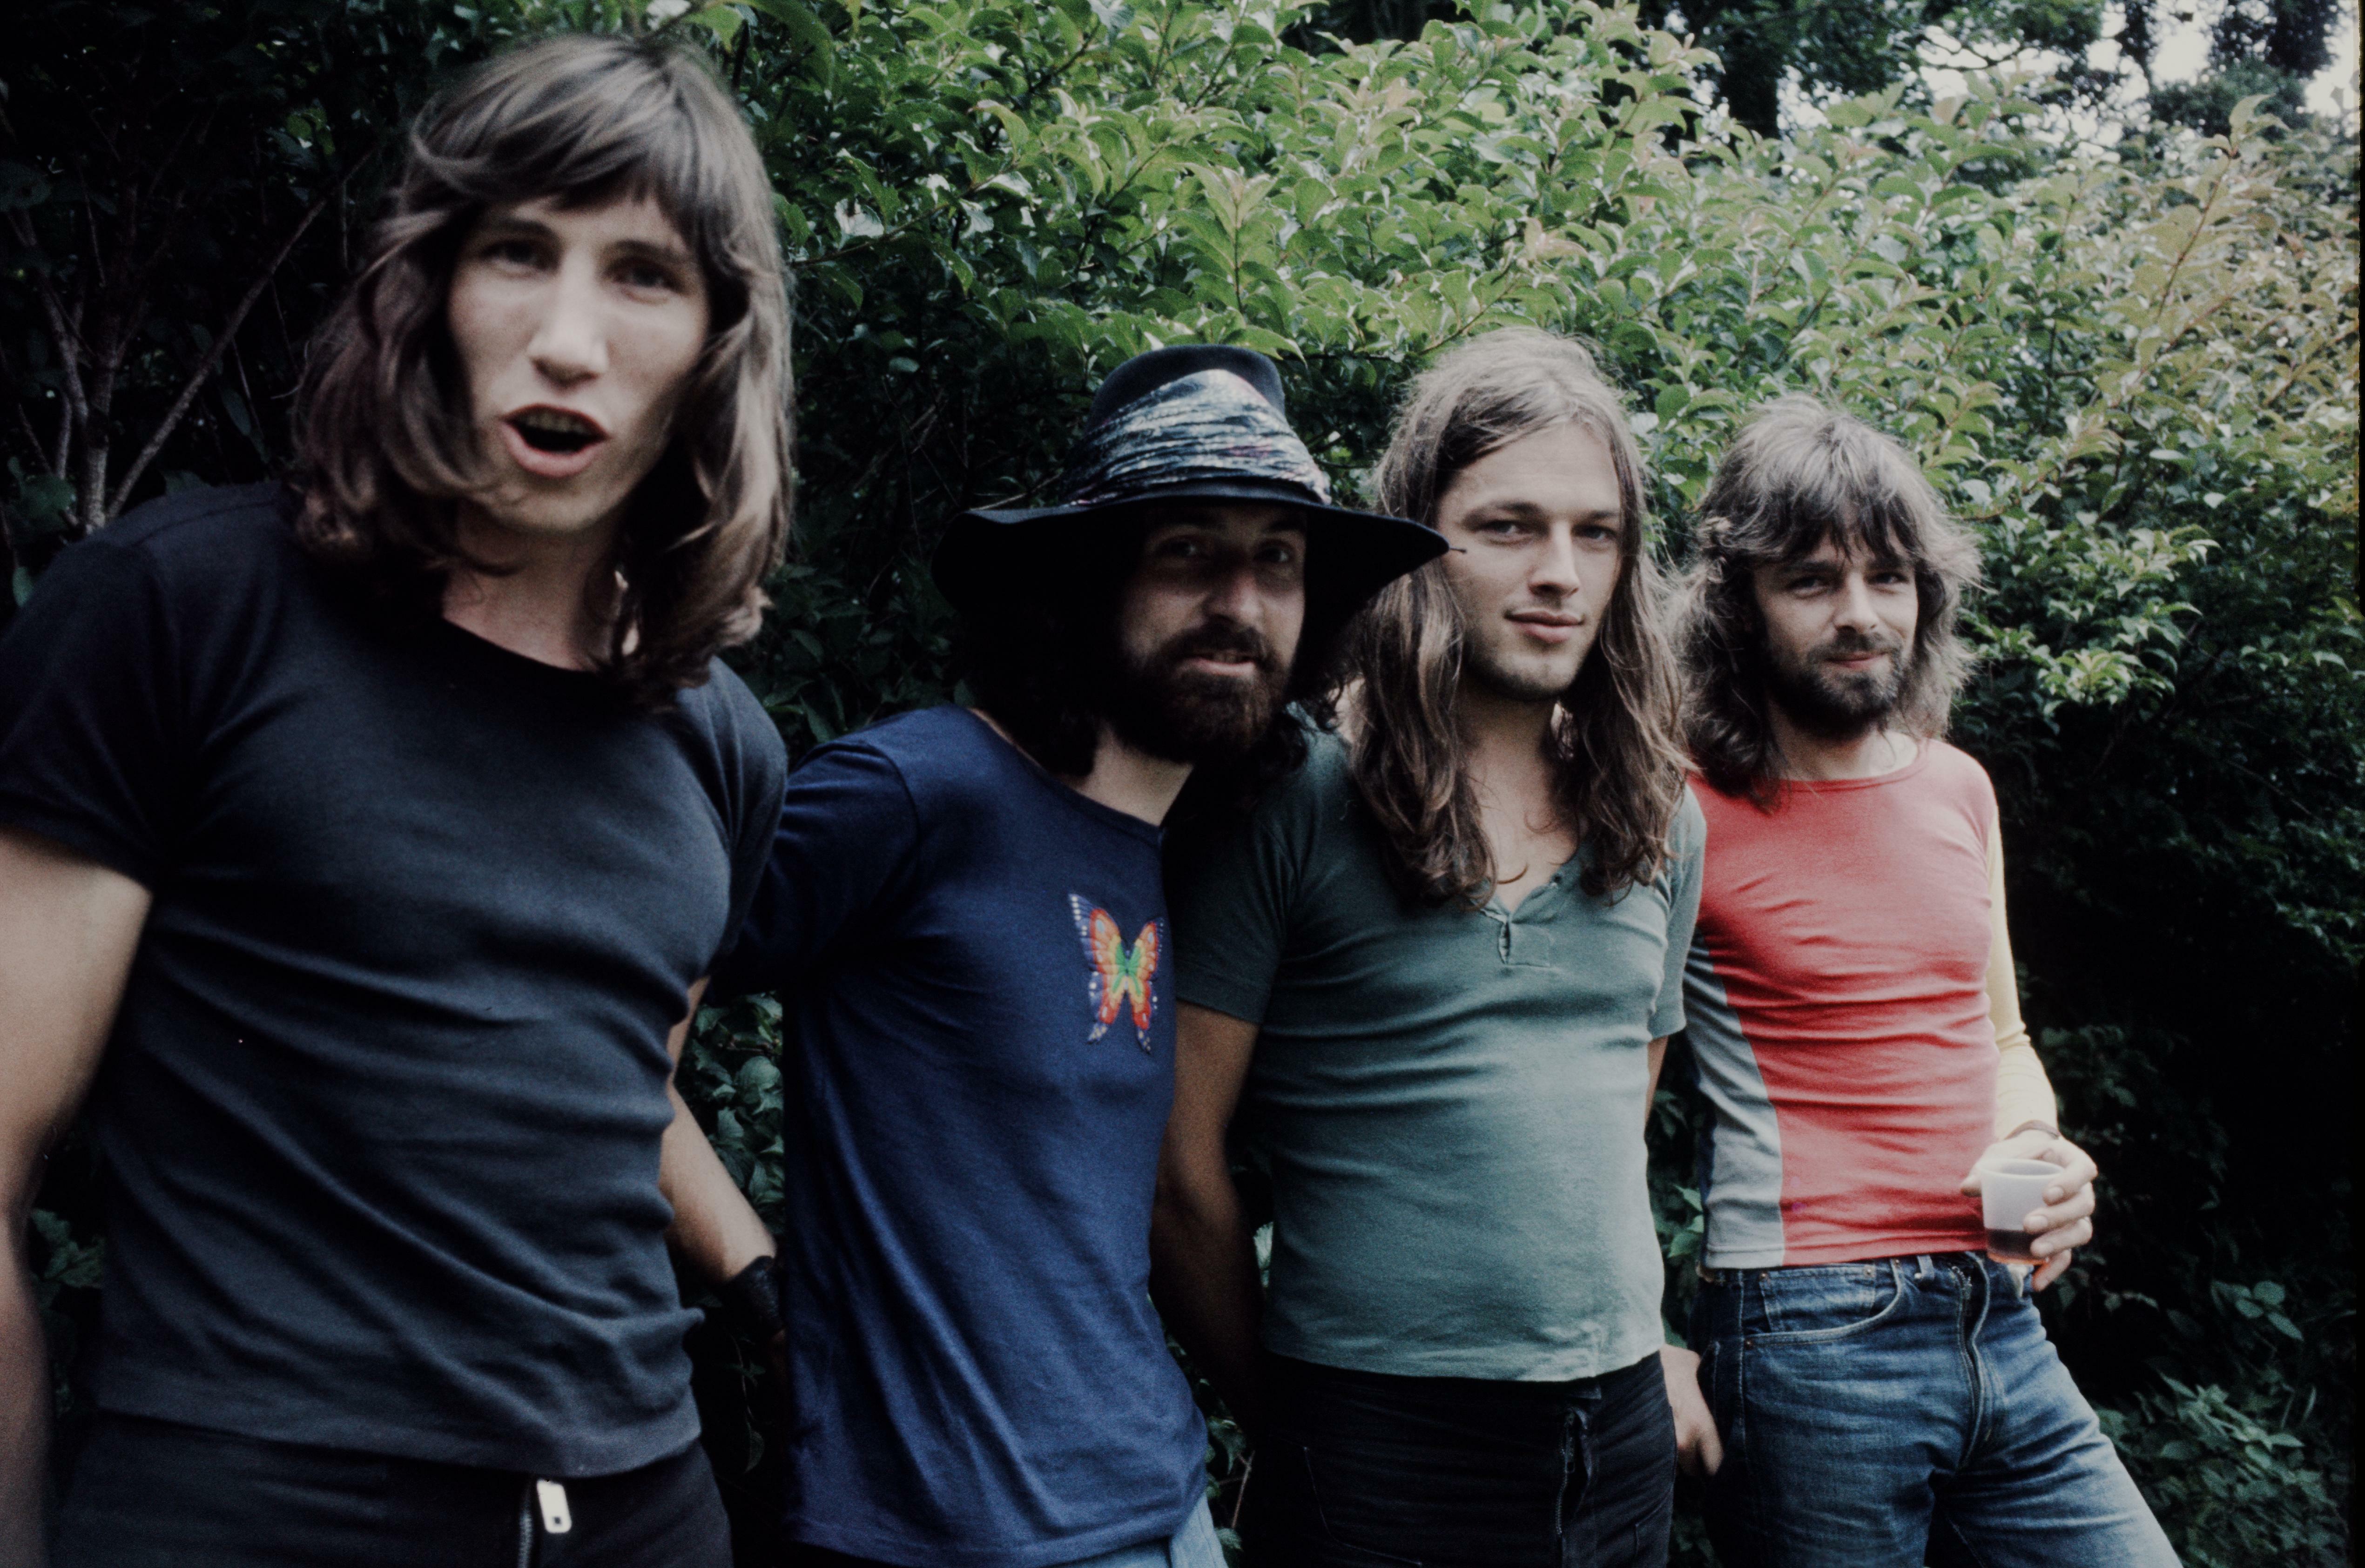 10 Things You Might Not Know About Pink Floyd's The Final Cut